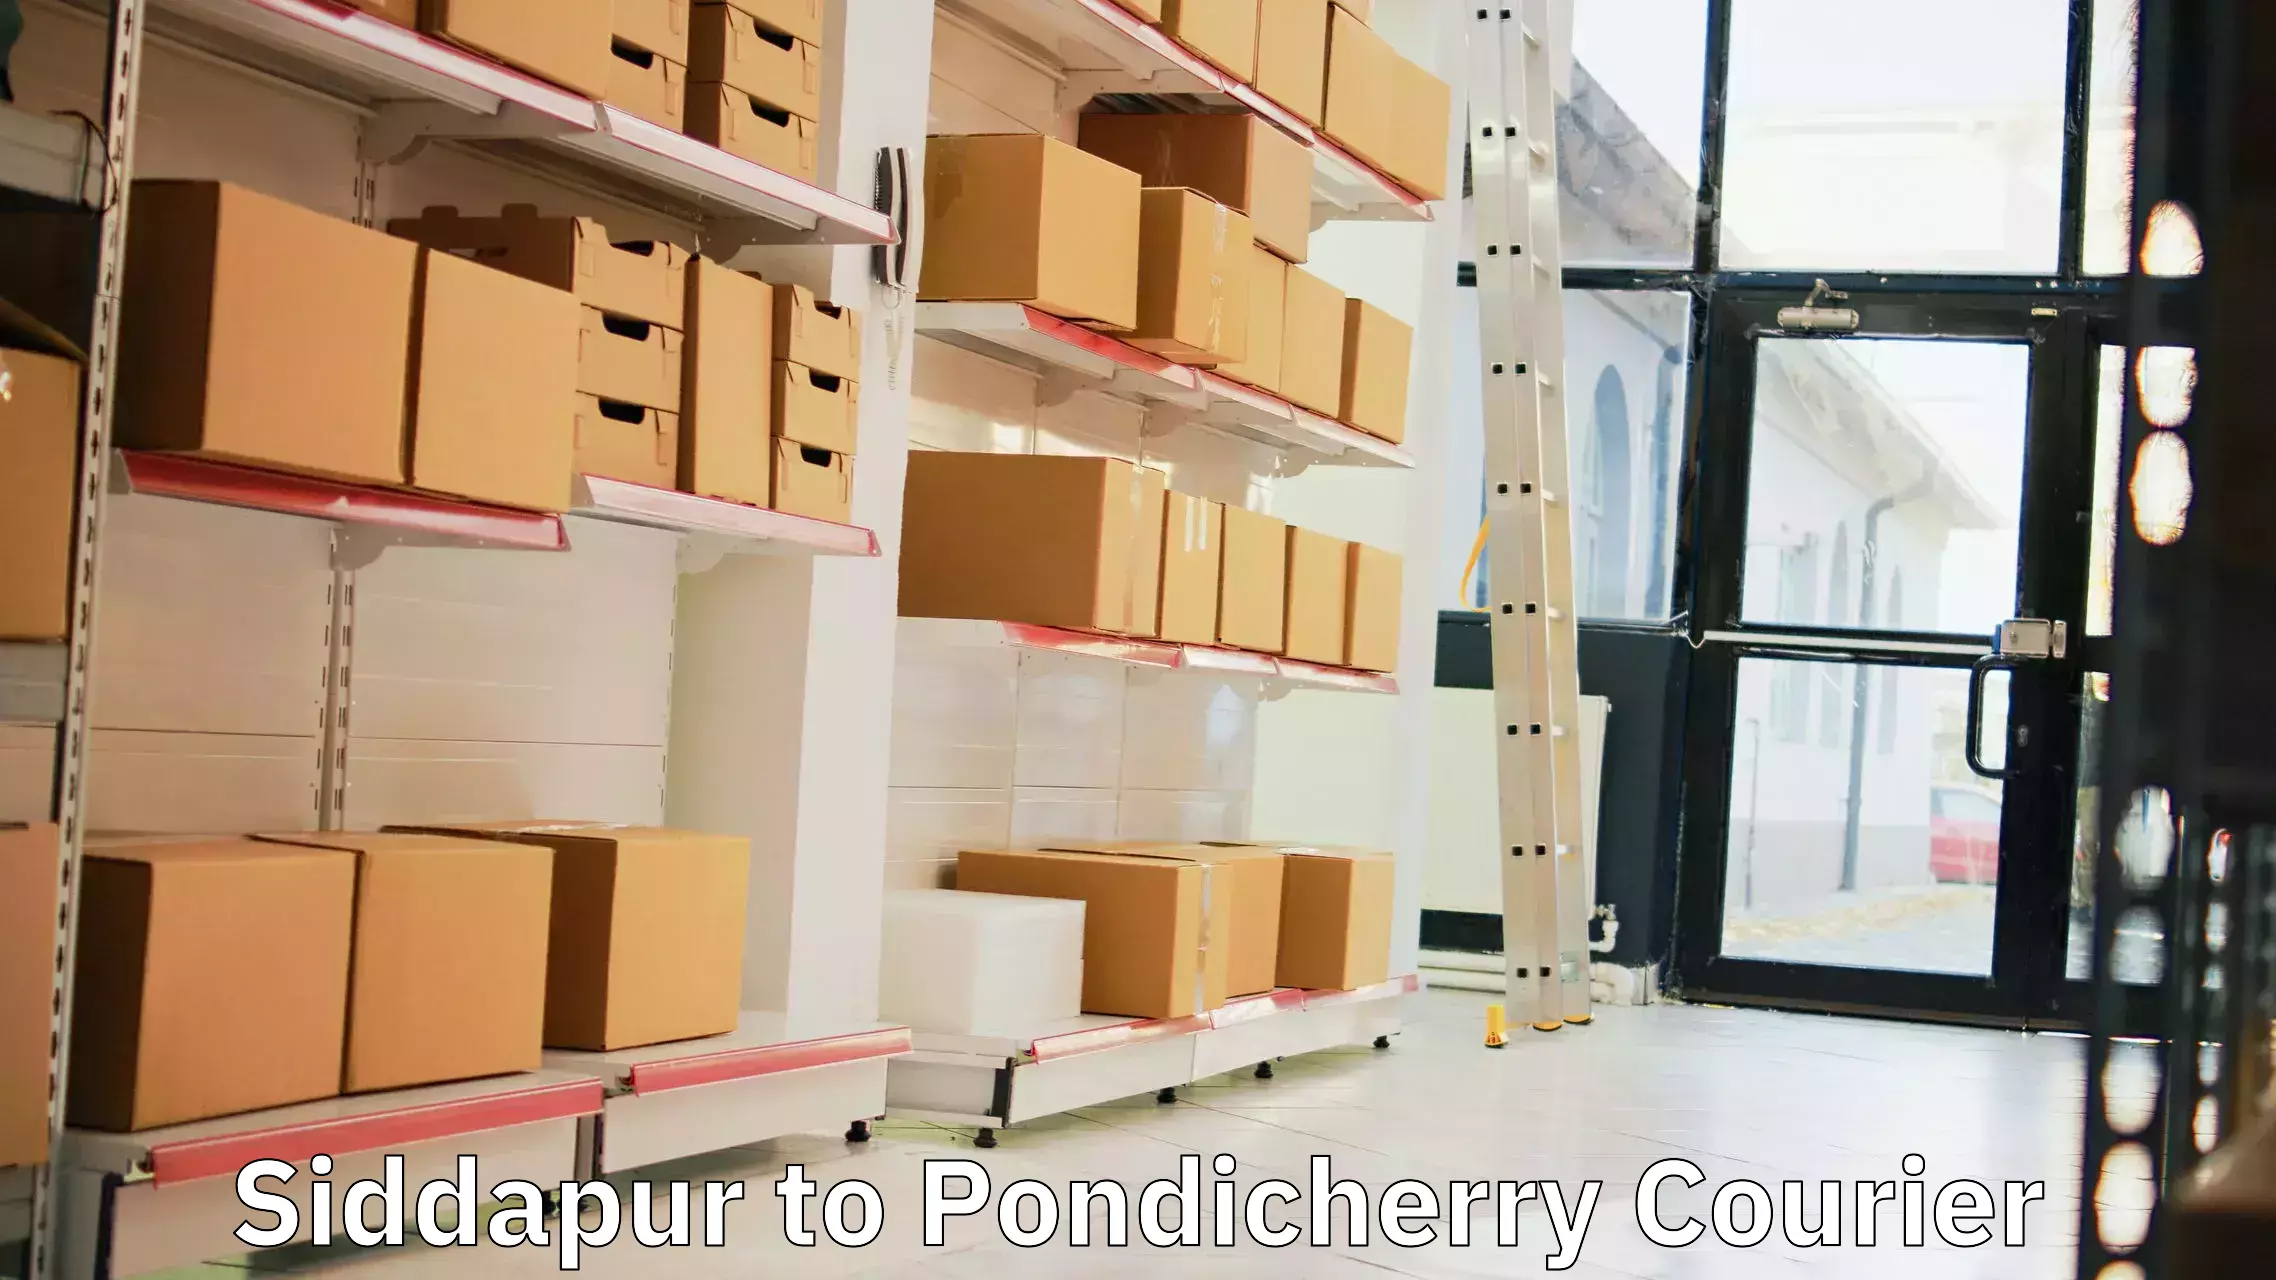 Courier service partnerships Siddapur to Pondicherry